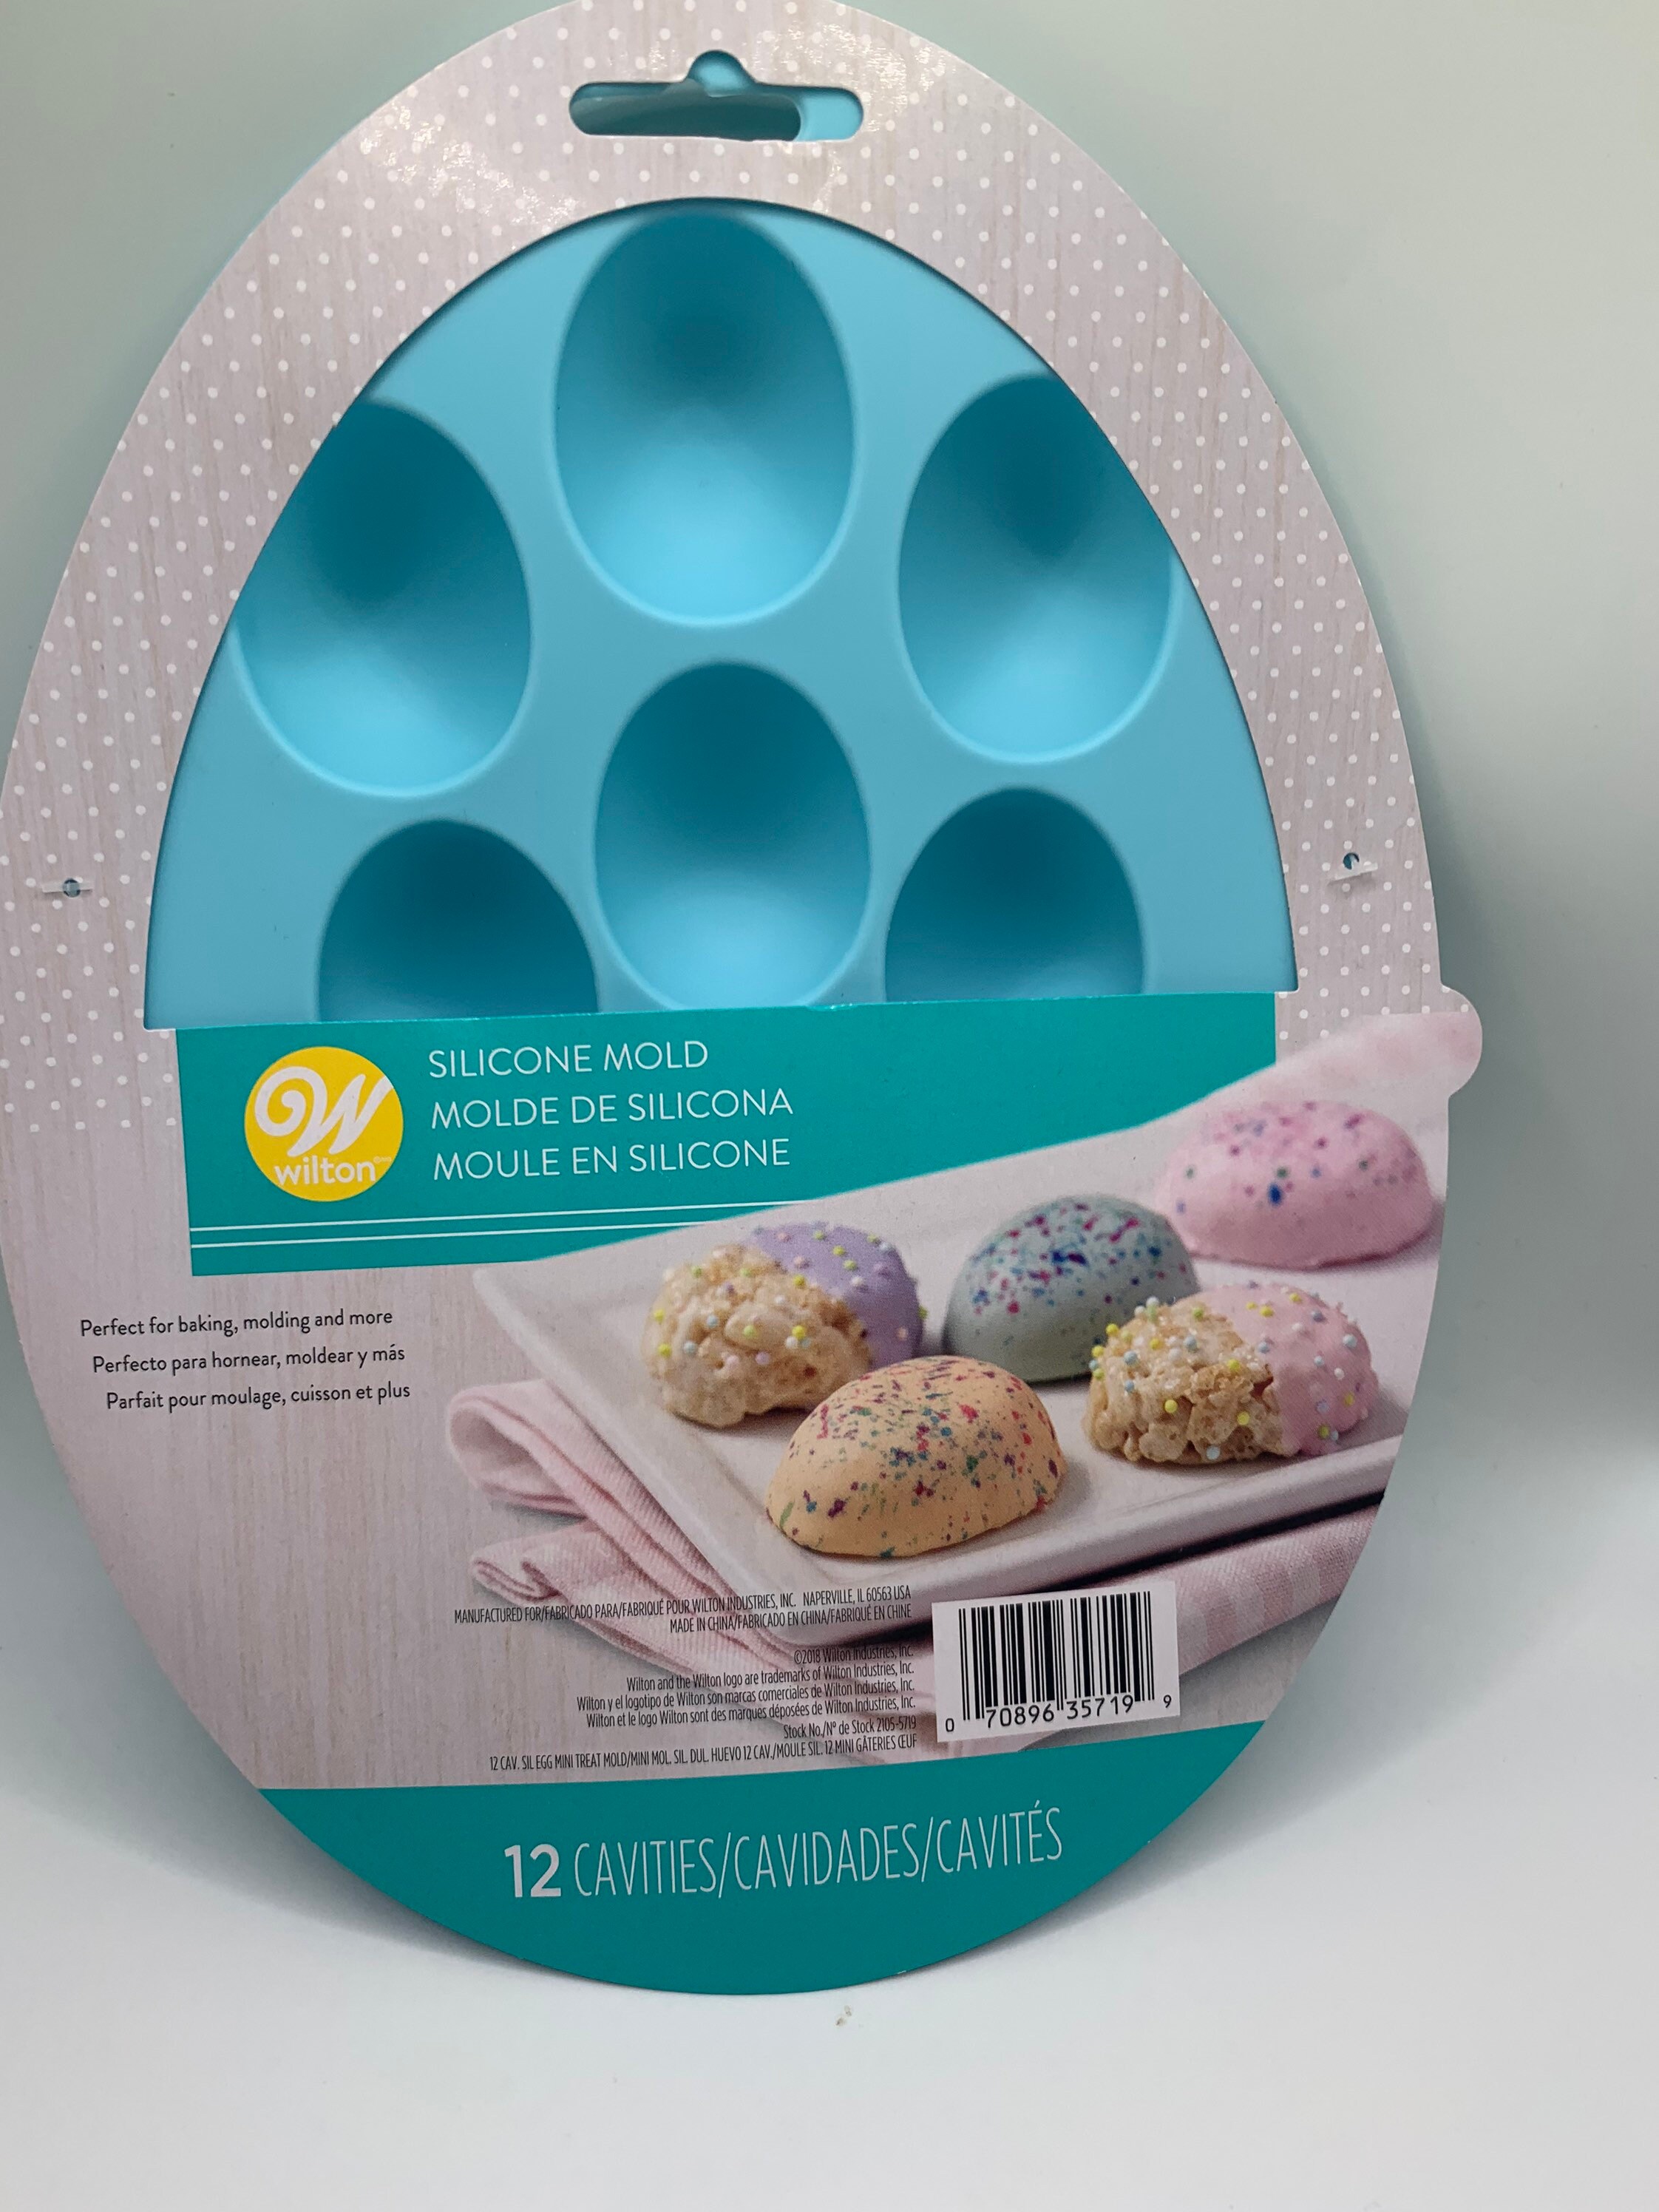 Cake & Marshmallows- Large 3.5 in Includes Cocoa Bomb Recipe Candy Egg Silicone Chocolate Mold- Large Easter Egg for Cocoa Bombs & Breakable Egg Chocolate Shells- fill with Peeps Easter Egg Mold 